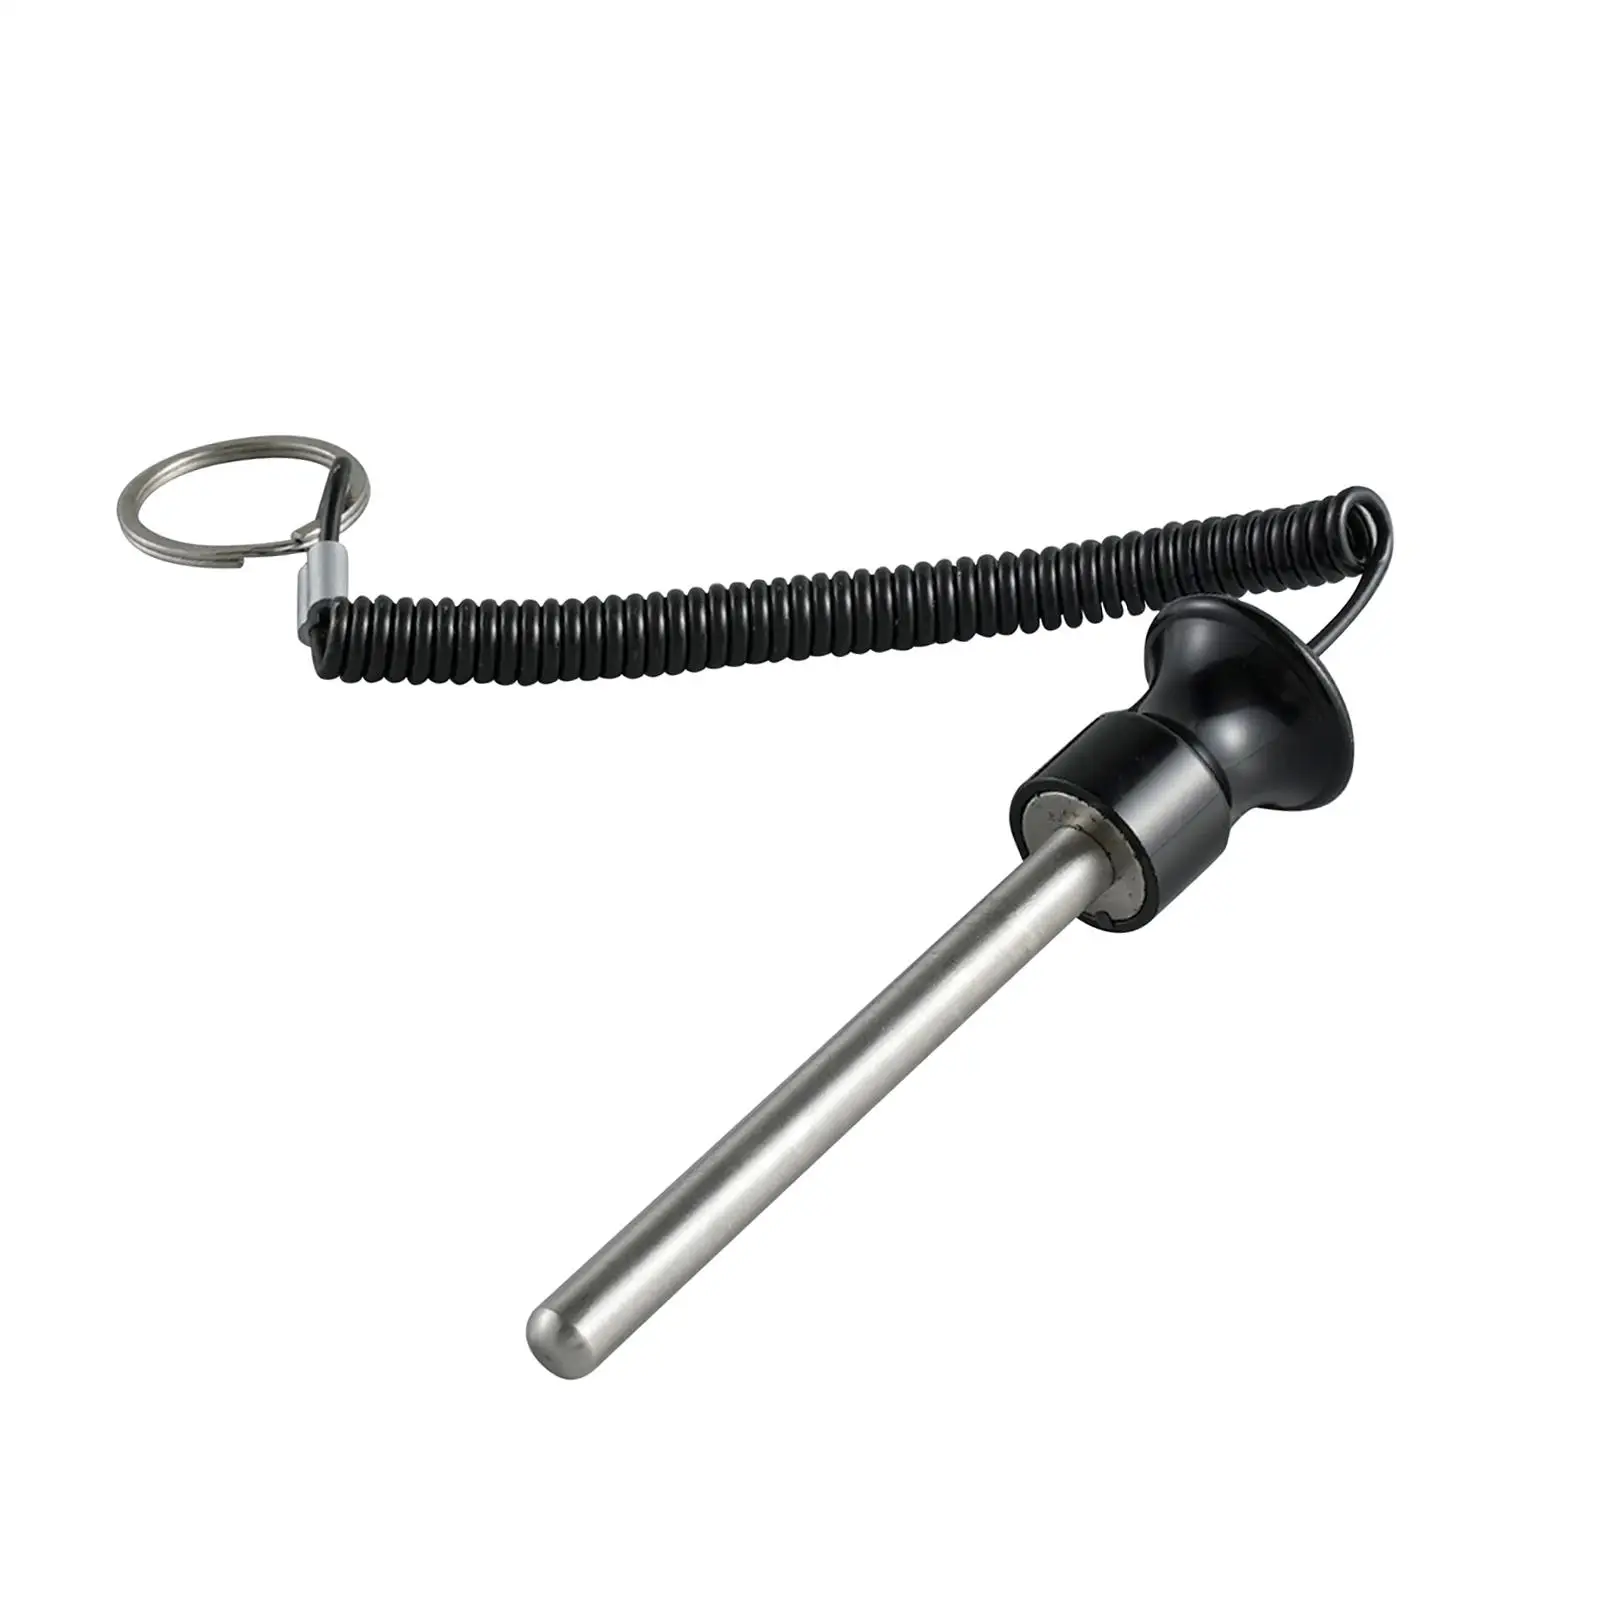 Portable Weight Stack Pin Aluminum Alloy Locking Cable Weight Loading Pin Selector Lock Pin Gym Equipment Replacement Part